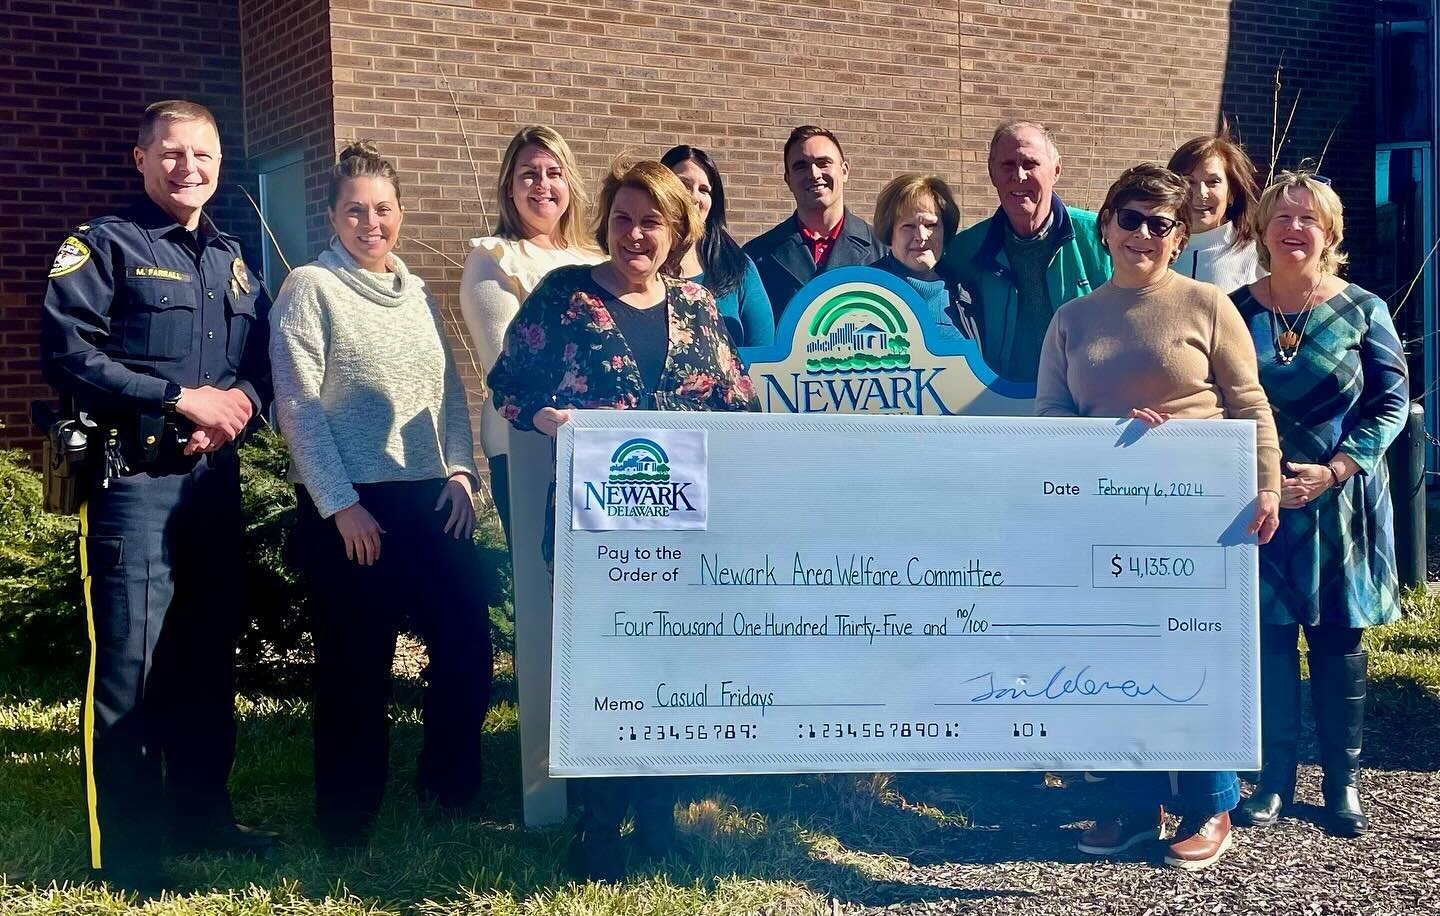 Thank you City of Newark for your continued support of the Newark Area Welfare Committee! #neighborshelpingneighbors #community